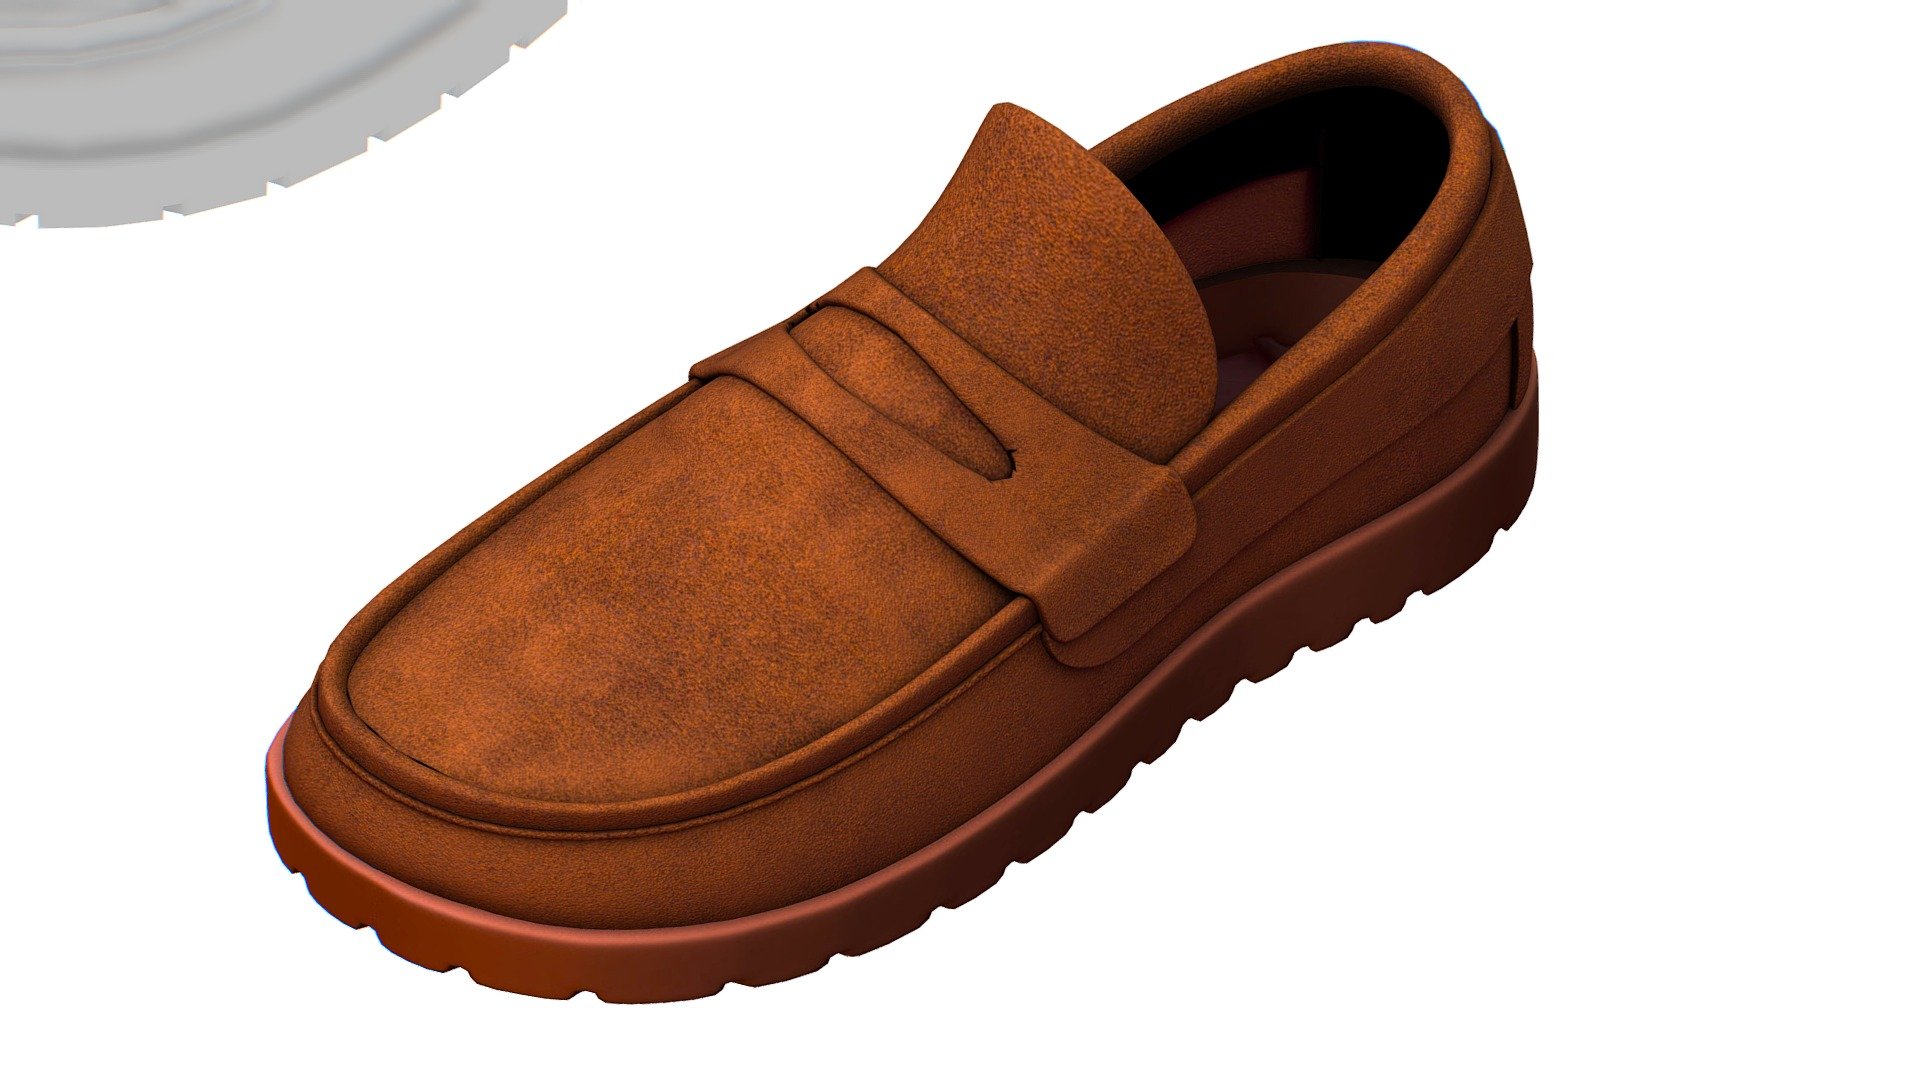 Cartoon High Poly Subdivision Brown Shoes Suede.

No HDRI map, No Light, No material settings - only Diffuse/Color Map Texture (2048x2048) 

More information about the 3D model: please use the Sketchfab Model Inspector - Key (i) - Cartoon High Poly Subdivision Brown Shoes Suede - Buy Royalty Free 3D model by Oleg Shuldiakov (@olegshuldiakov) 3d model